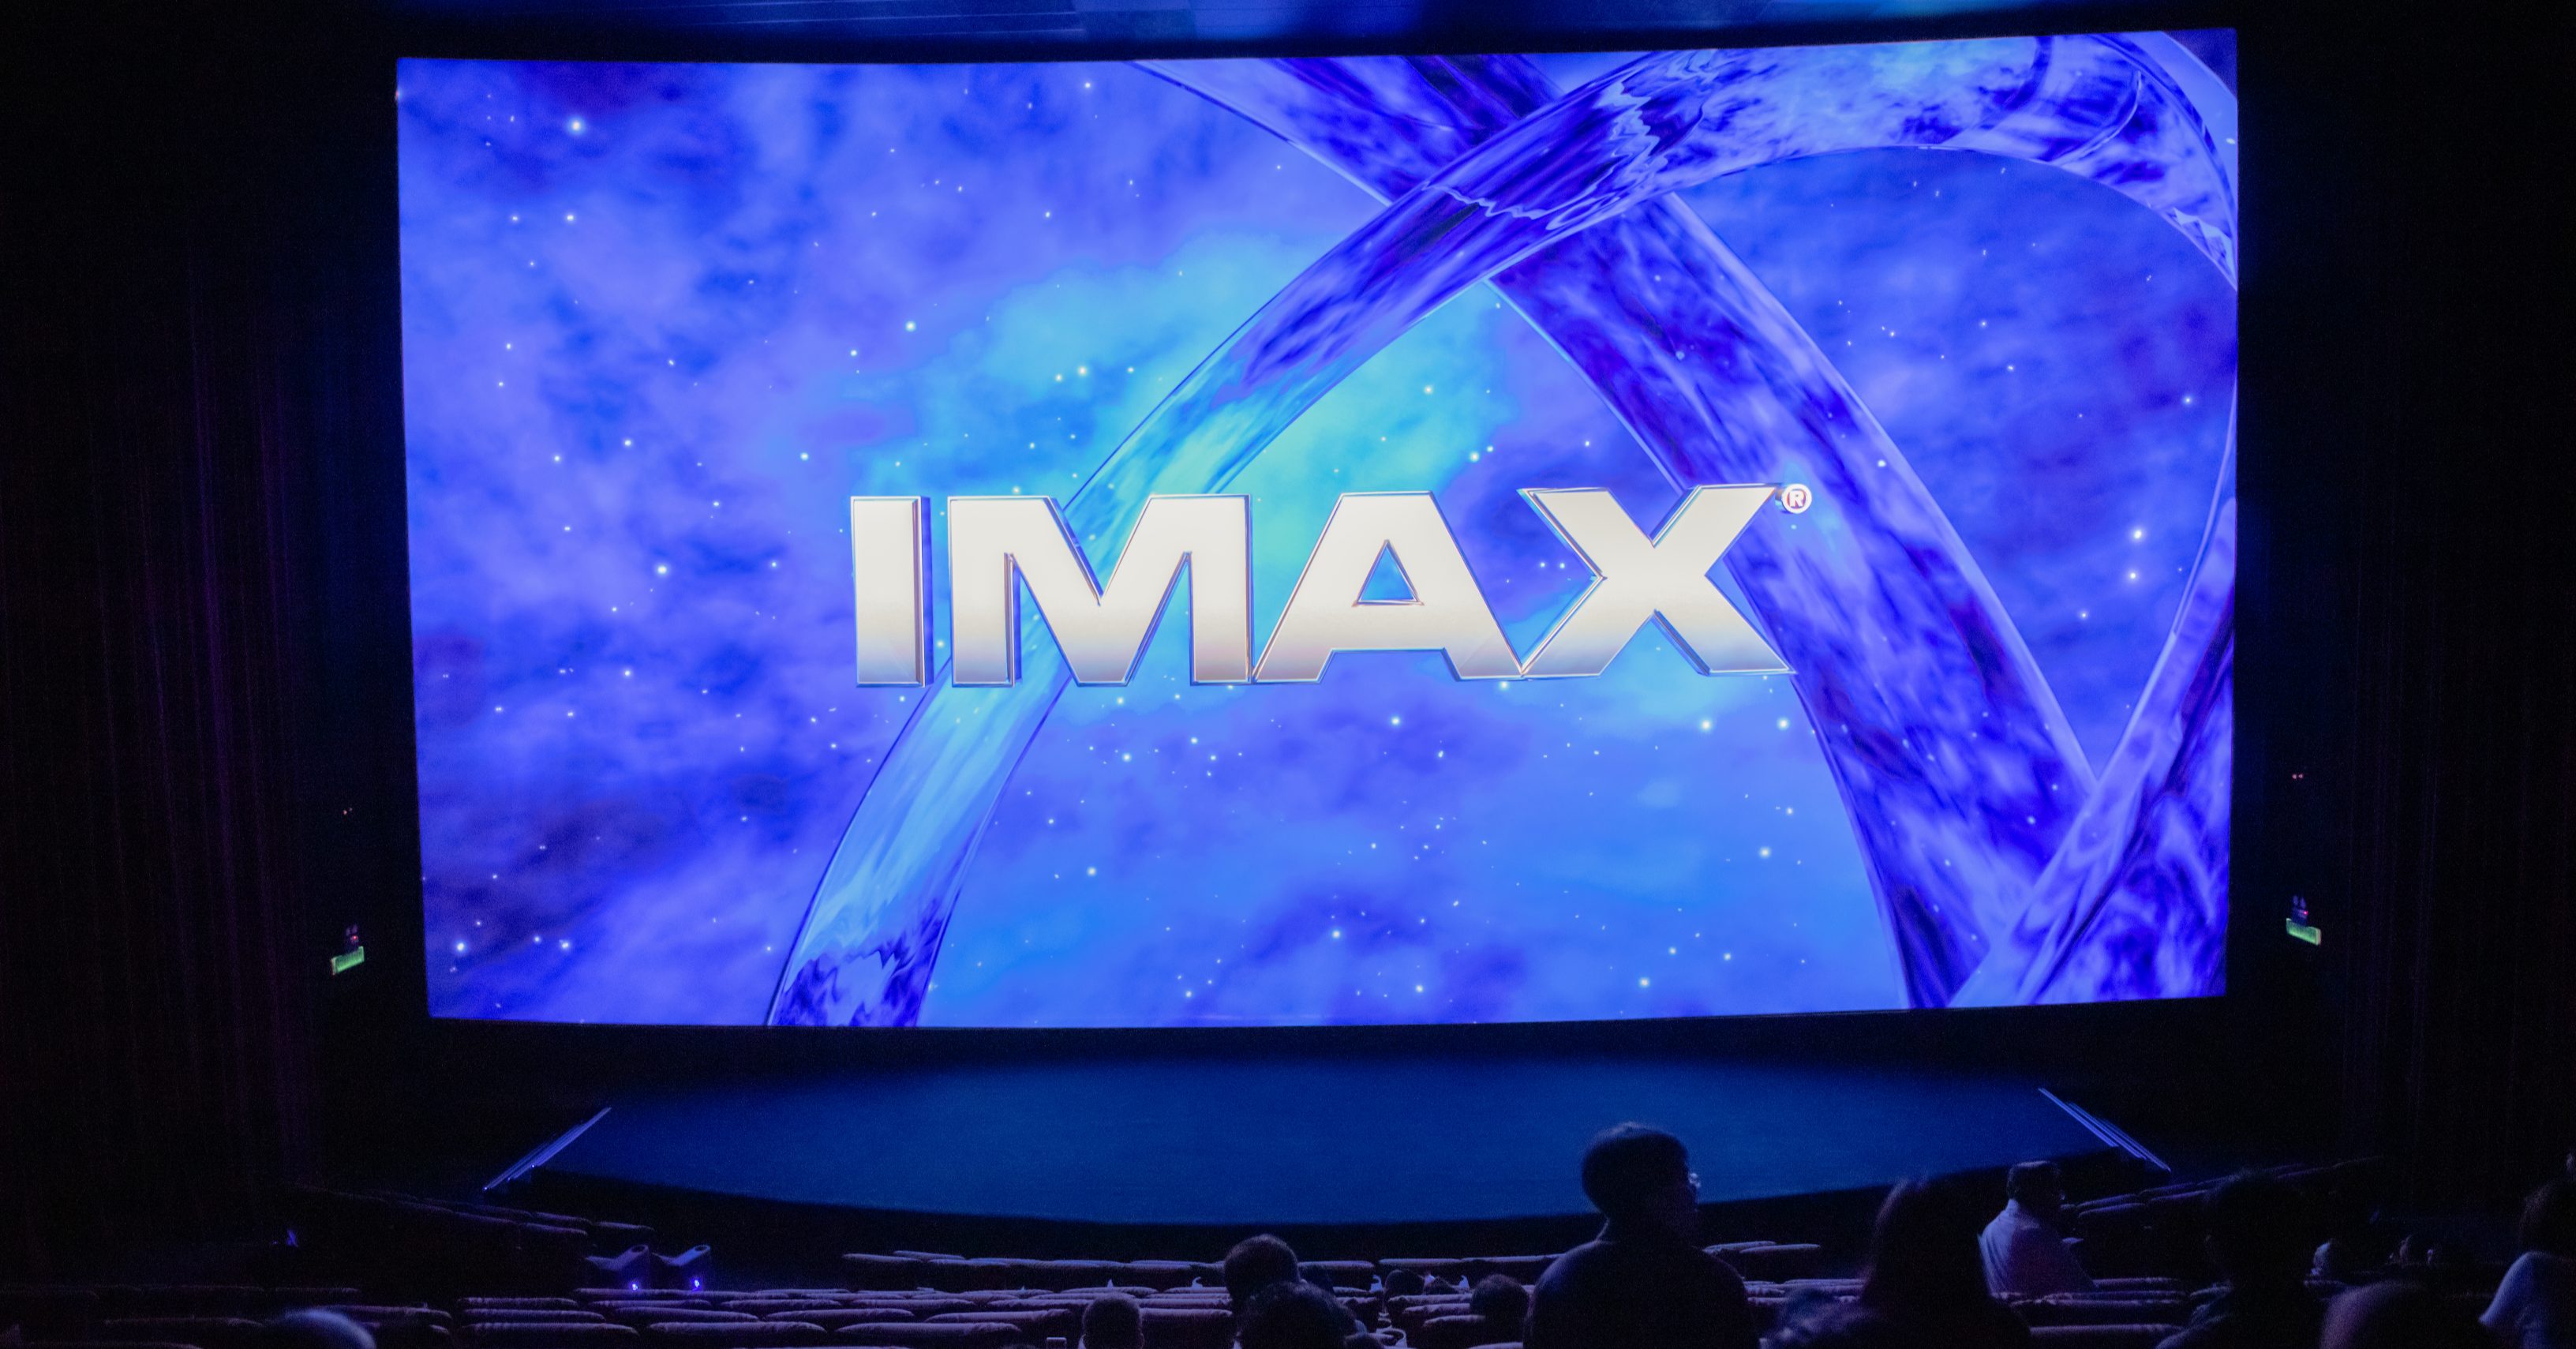 IMAX with Laser Systems